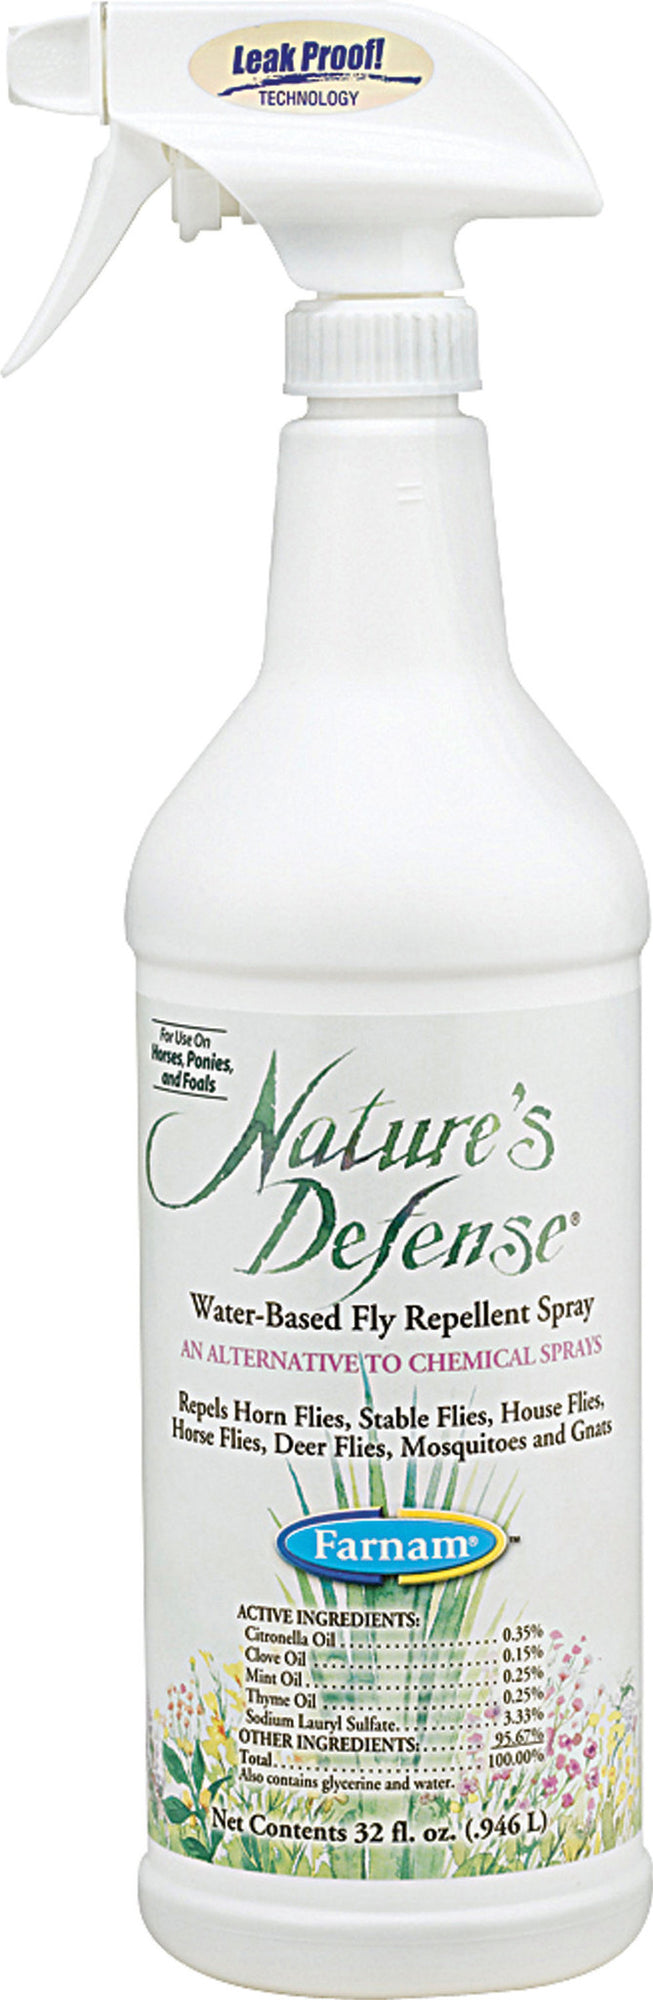 Nature’s Defense Water Based Fly Repellent Spray